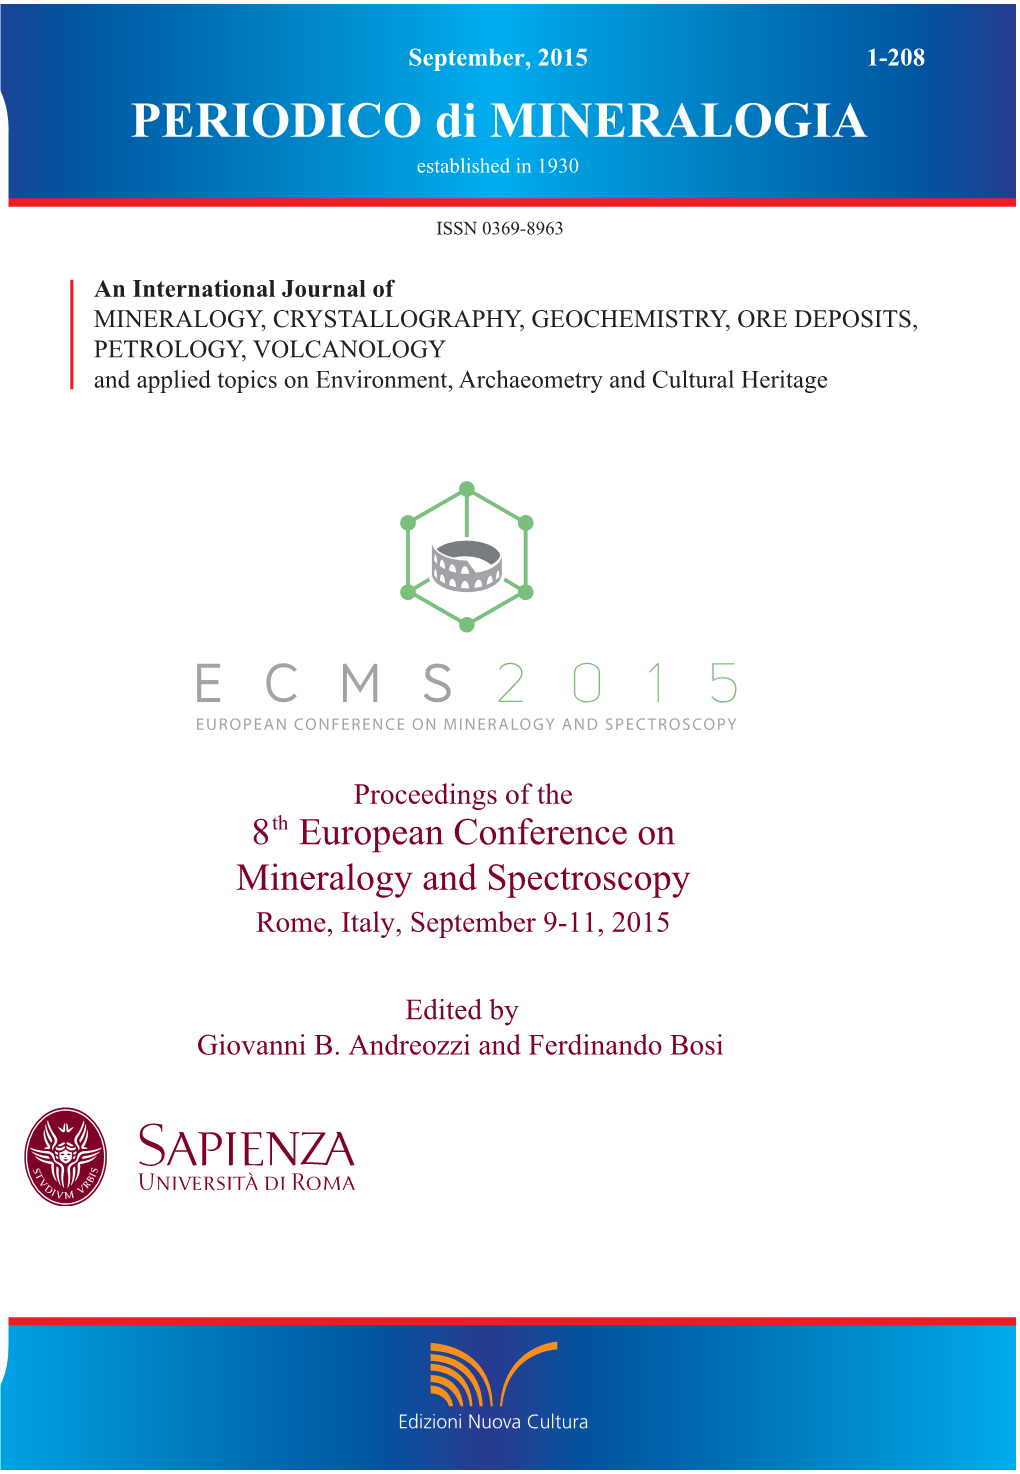 Periodico Di Mineralogia and the Support of Sapienza Università Di Roma, It Would Have Been Very Difficult to Organize This Meeting and This Volume